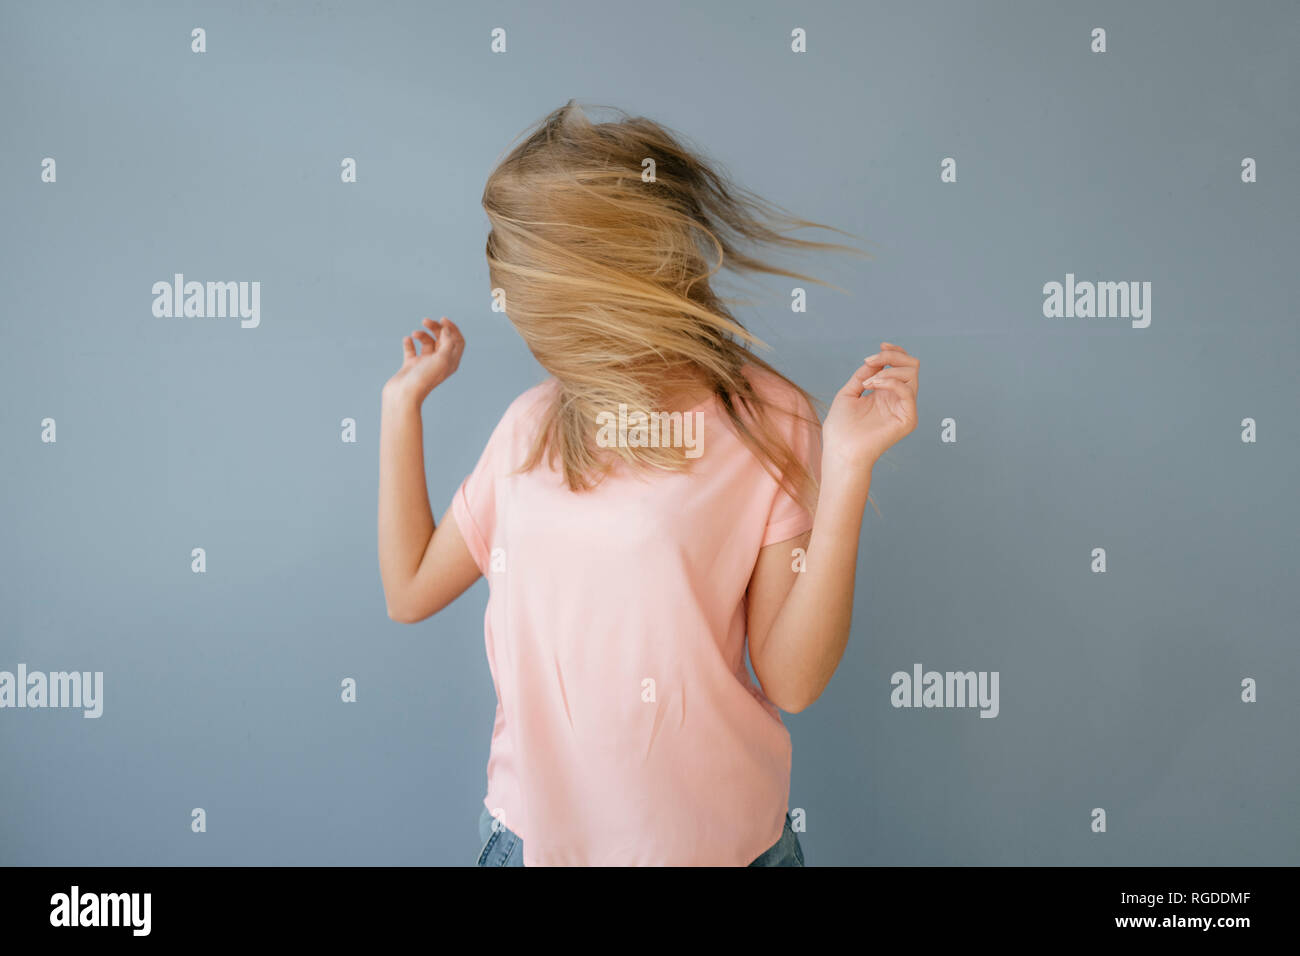 Young woman with hair covering her face Stock Photo